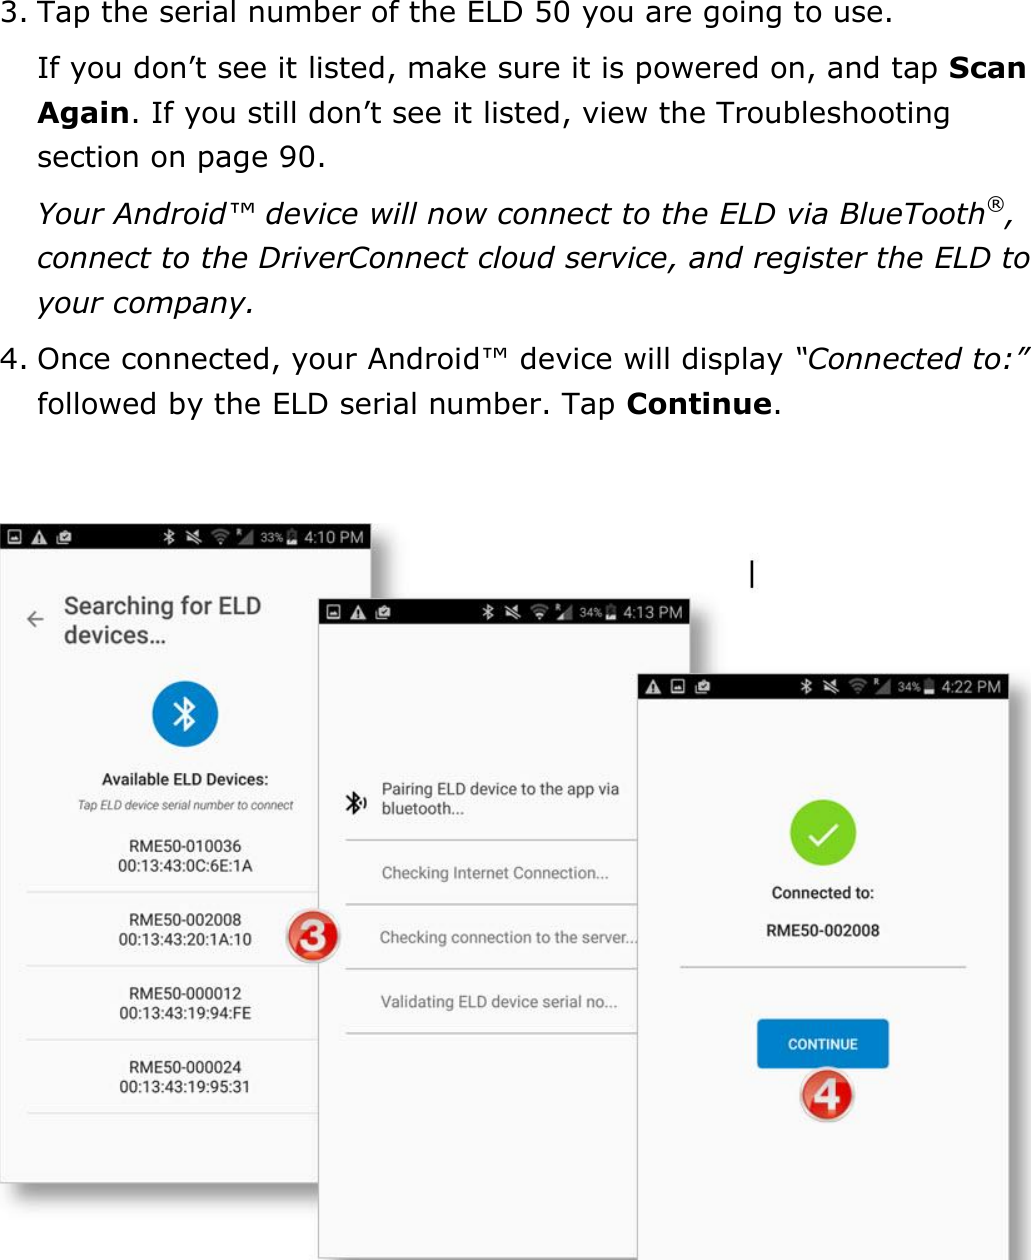 Set My Duty Status DriverConnect User Guide  11 © 2016-2017, Rand McNally, Inc. 3. Tap the serial number of the ELD 50 you are going to use. If you don’t see it listed, make sure it is powered on, and tap Scan Again. If you still don’t see it listed, view the Troubleshooting section on page 90. Your Android™ device will now connect to the ELD via BlueTooth®, connect to the DriverConnect cloud service, and register the ELD to your company. 4. Once connected, your Android™ device will display “Connected to:” followed by the ELD serial number. Tap Continue.     